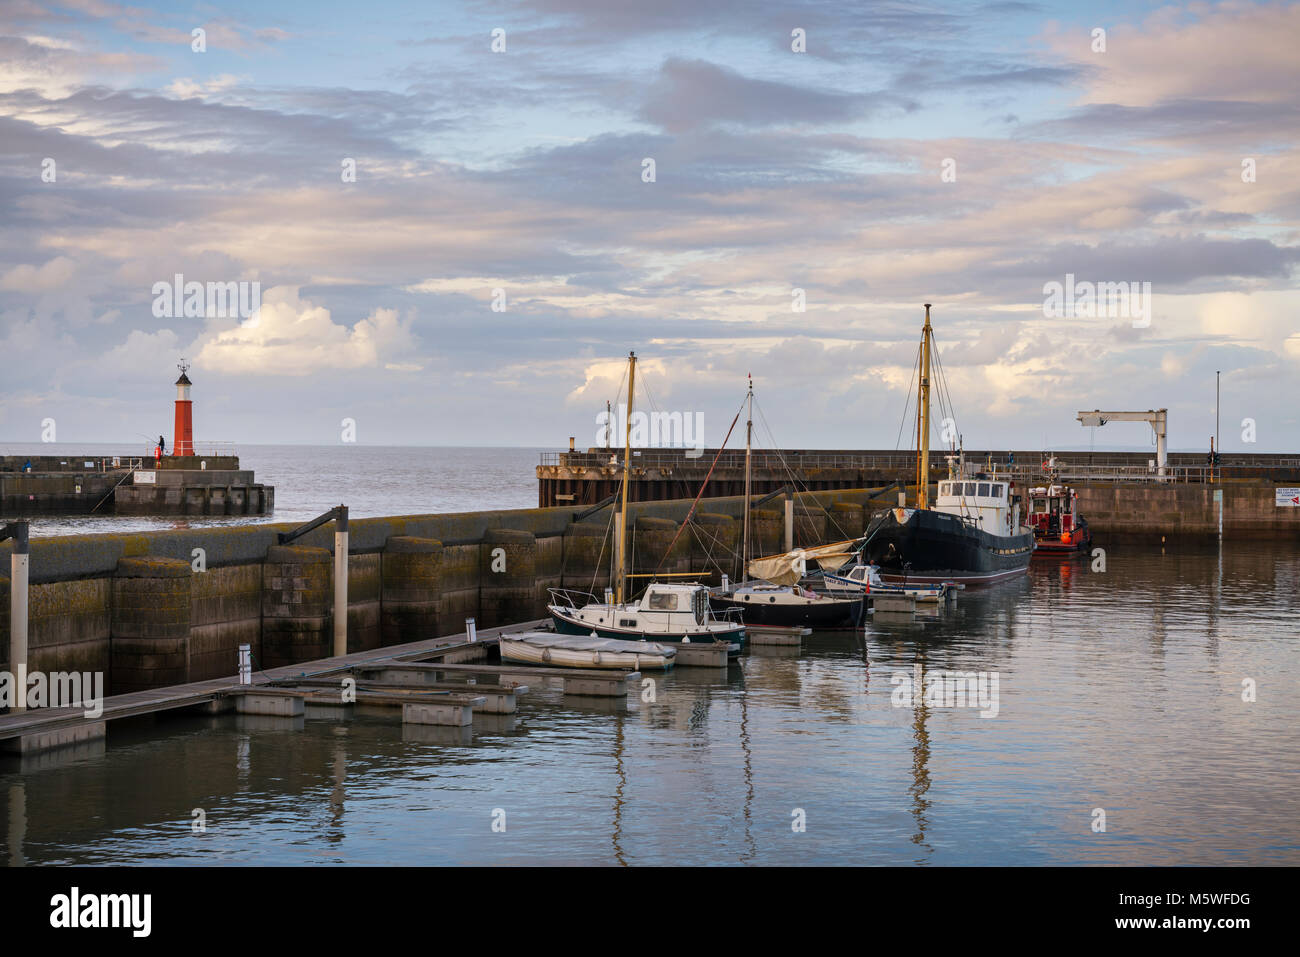 The harbour with lighthouse at Watchet a seaside town in the English county of Somerset between Minehead and Bridgewater in the Exmoor national park. Stock Photo